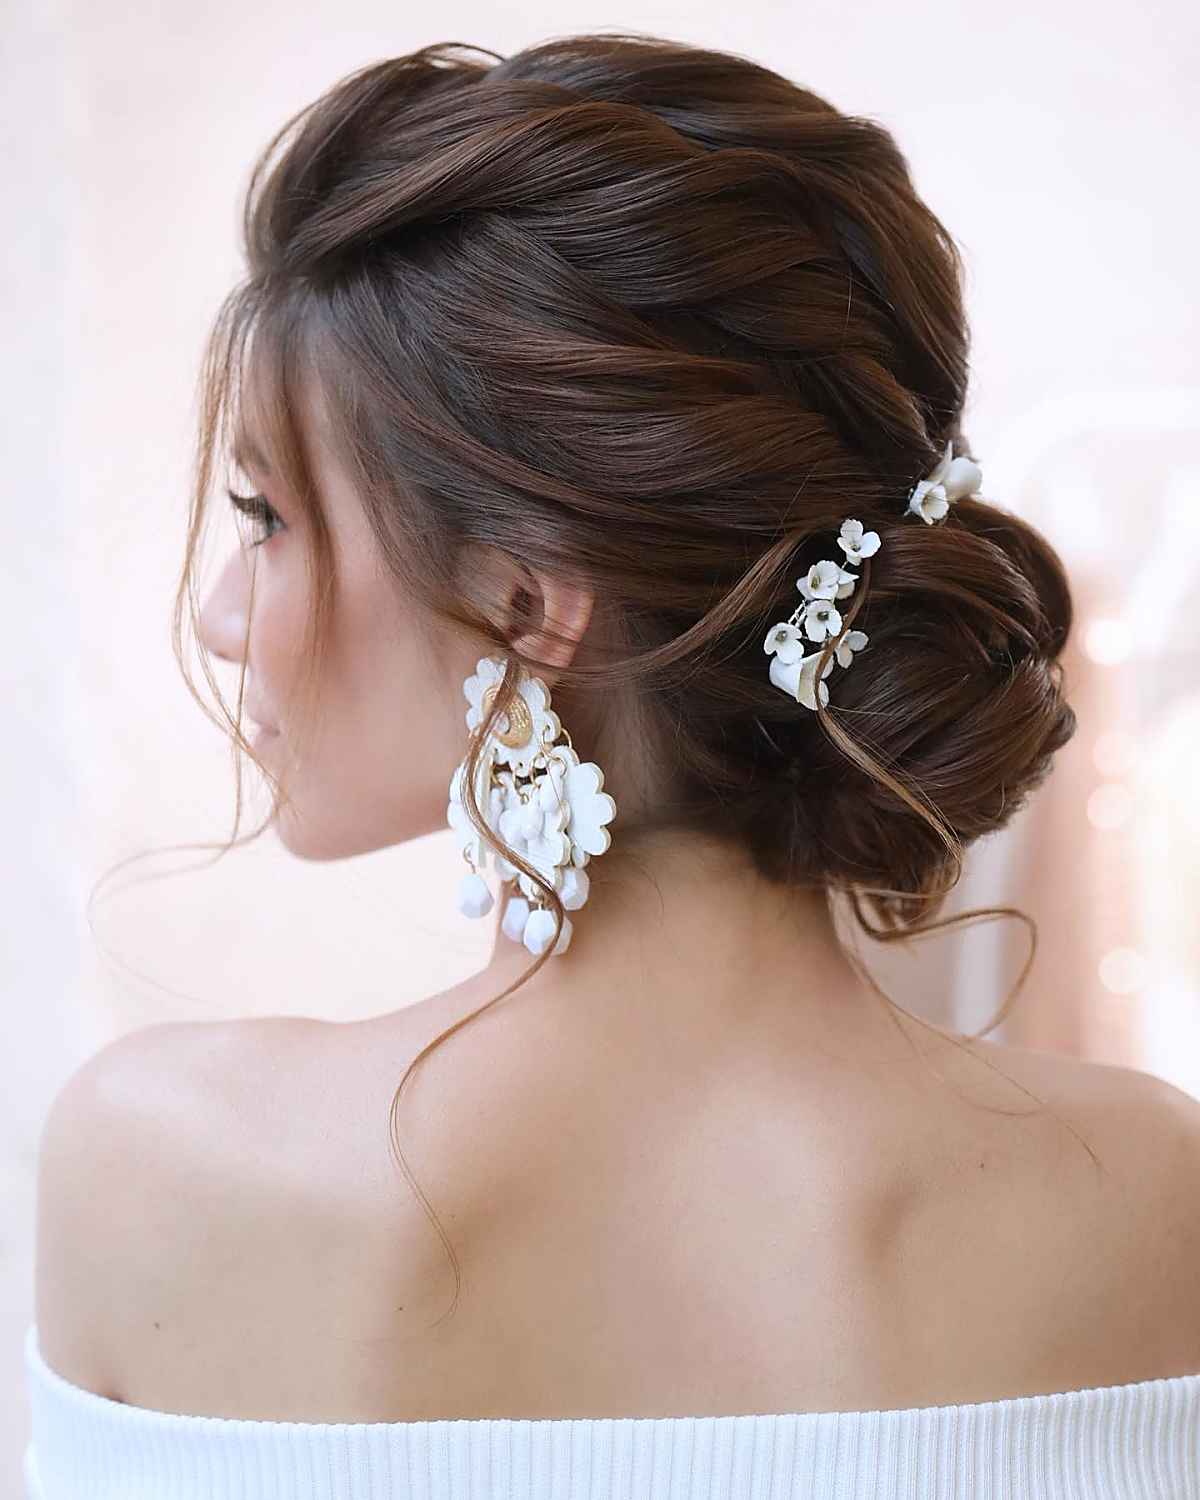 27 Gorgeous Wedding Updos for Every Type of Bride